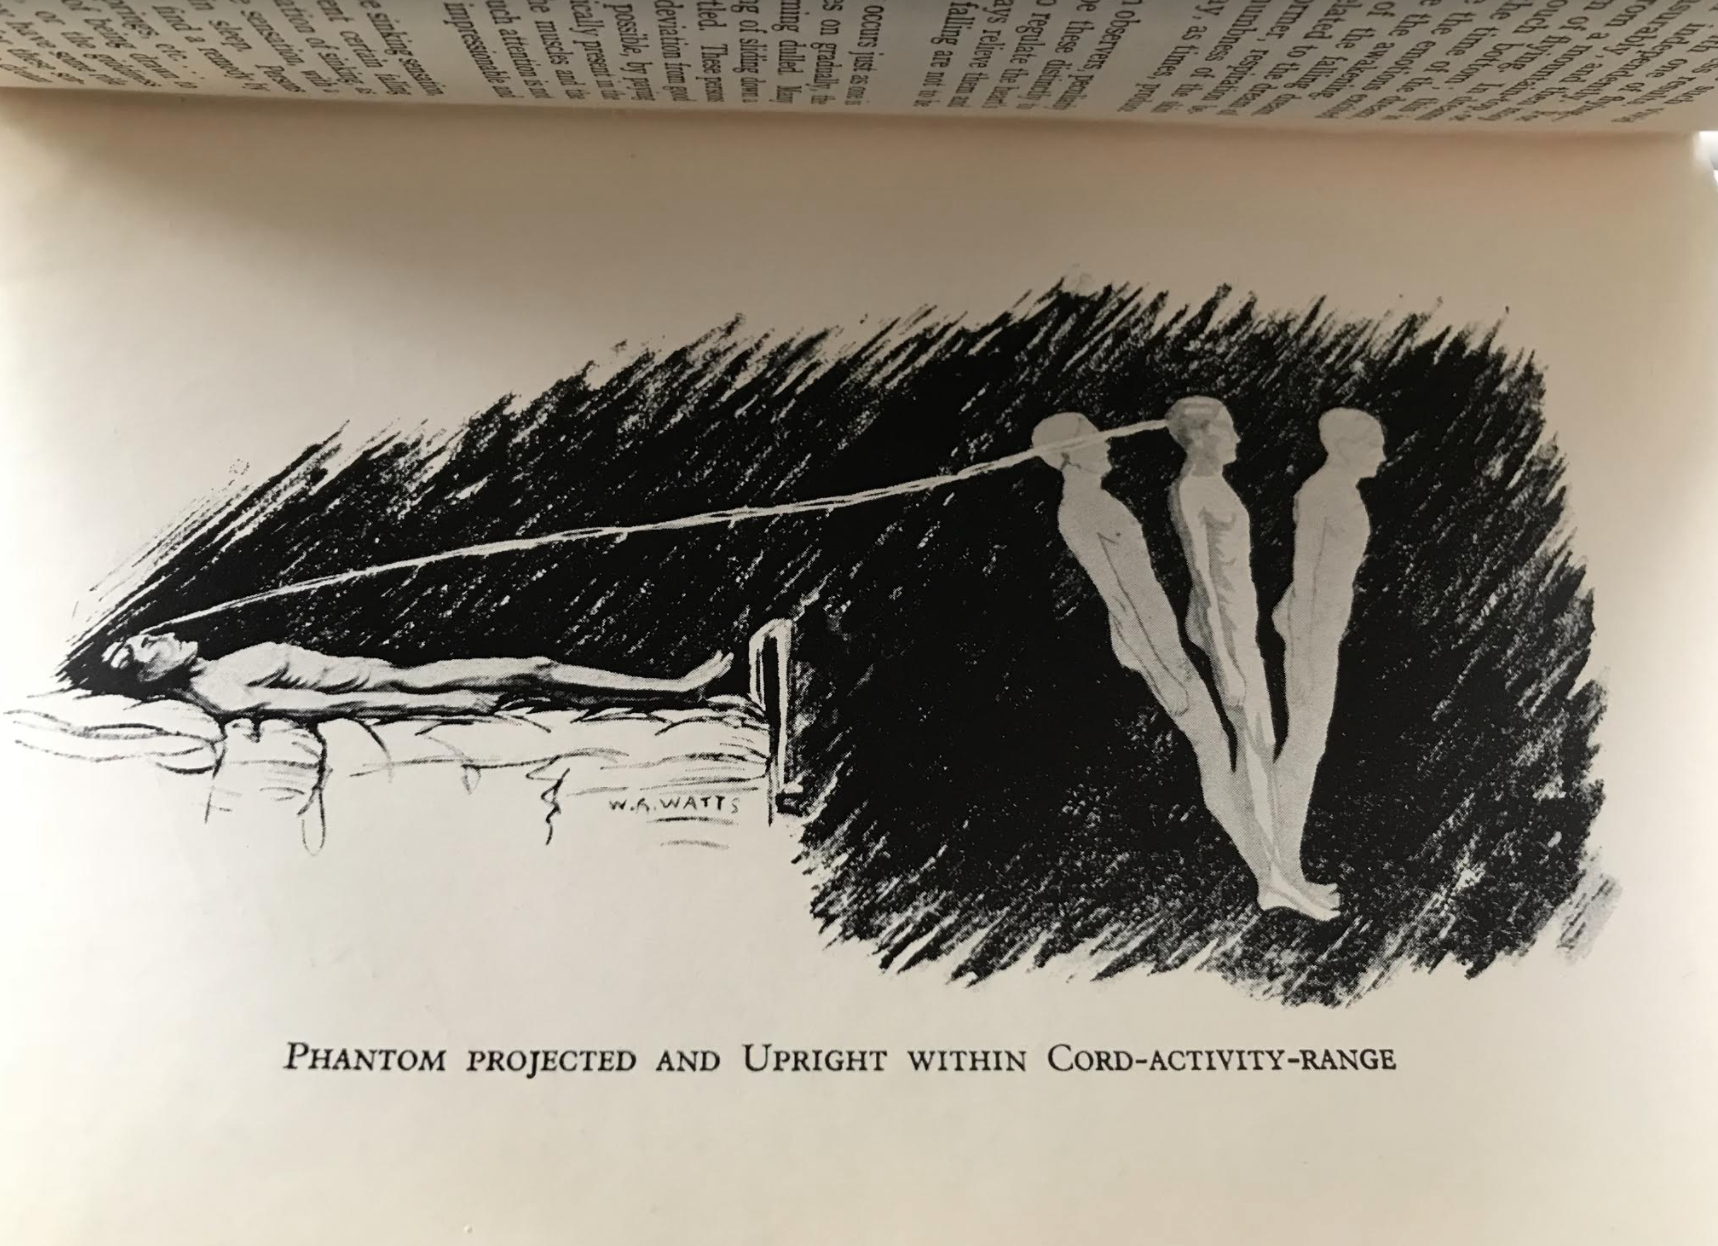 Astral Projection, from The Projection of the Astral Body, by Hereward Carrington and Sylvan Muldoon (1929).